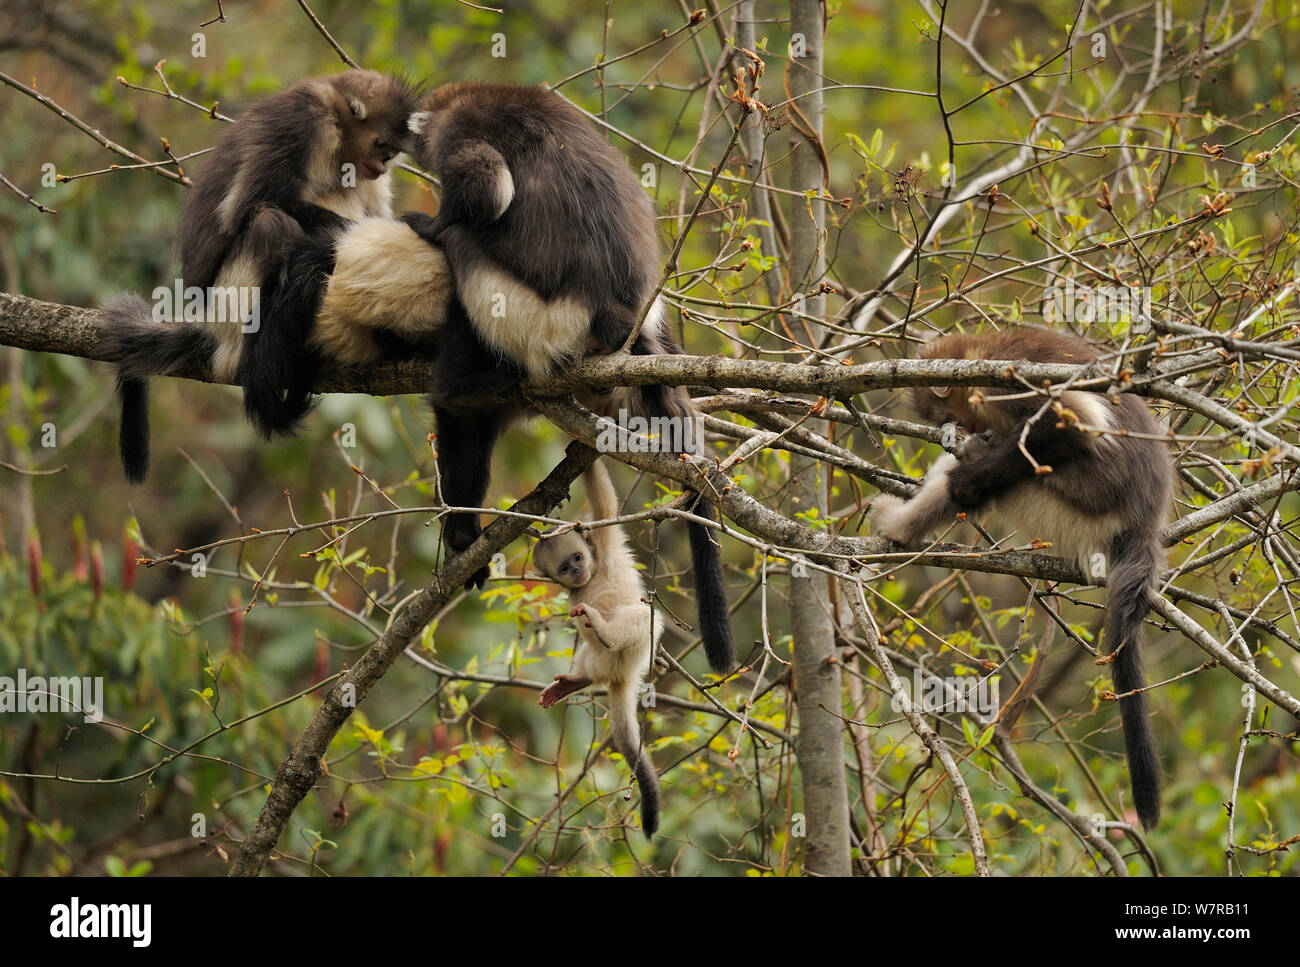 Yunnan Snub-nosed monkey (Rhinopithecus bieti) group with adults grooming, and a baby hanging from a branch, Ta Chen NP, Yunnan province, China Stock Photo